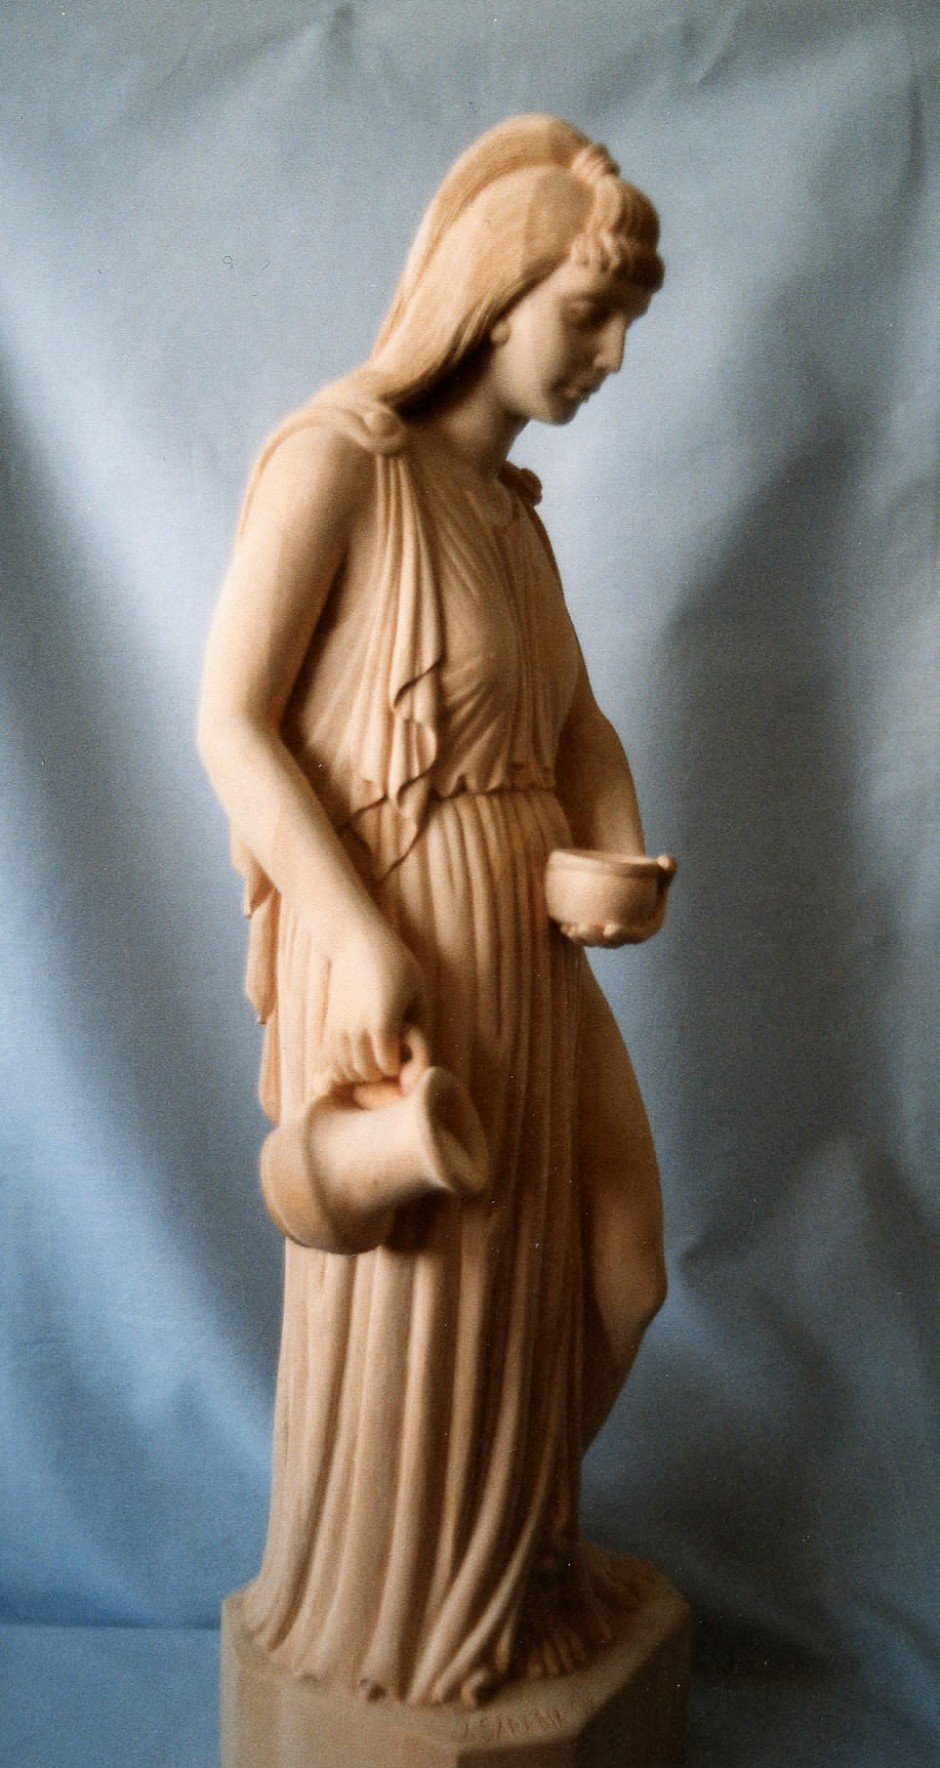 Water Maid - additional view - water maid, water giver, wood carved, garden ornament, jelluton